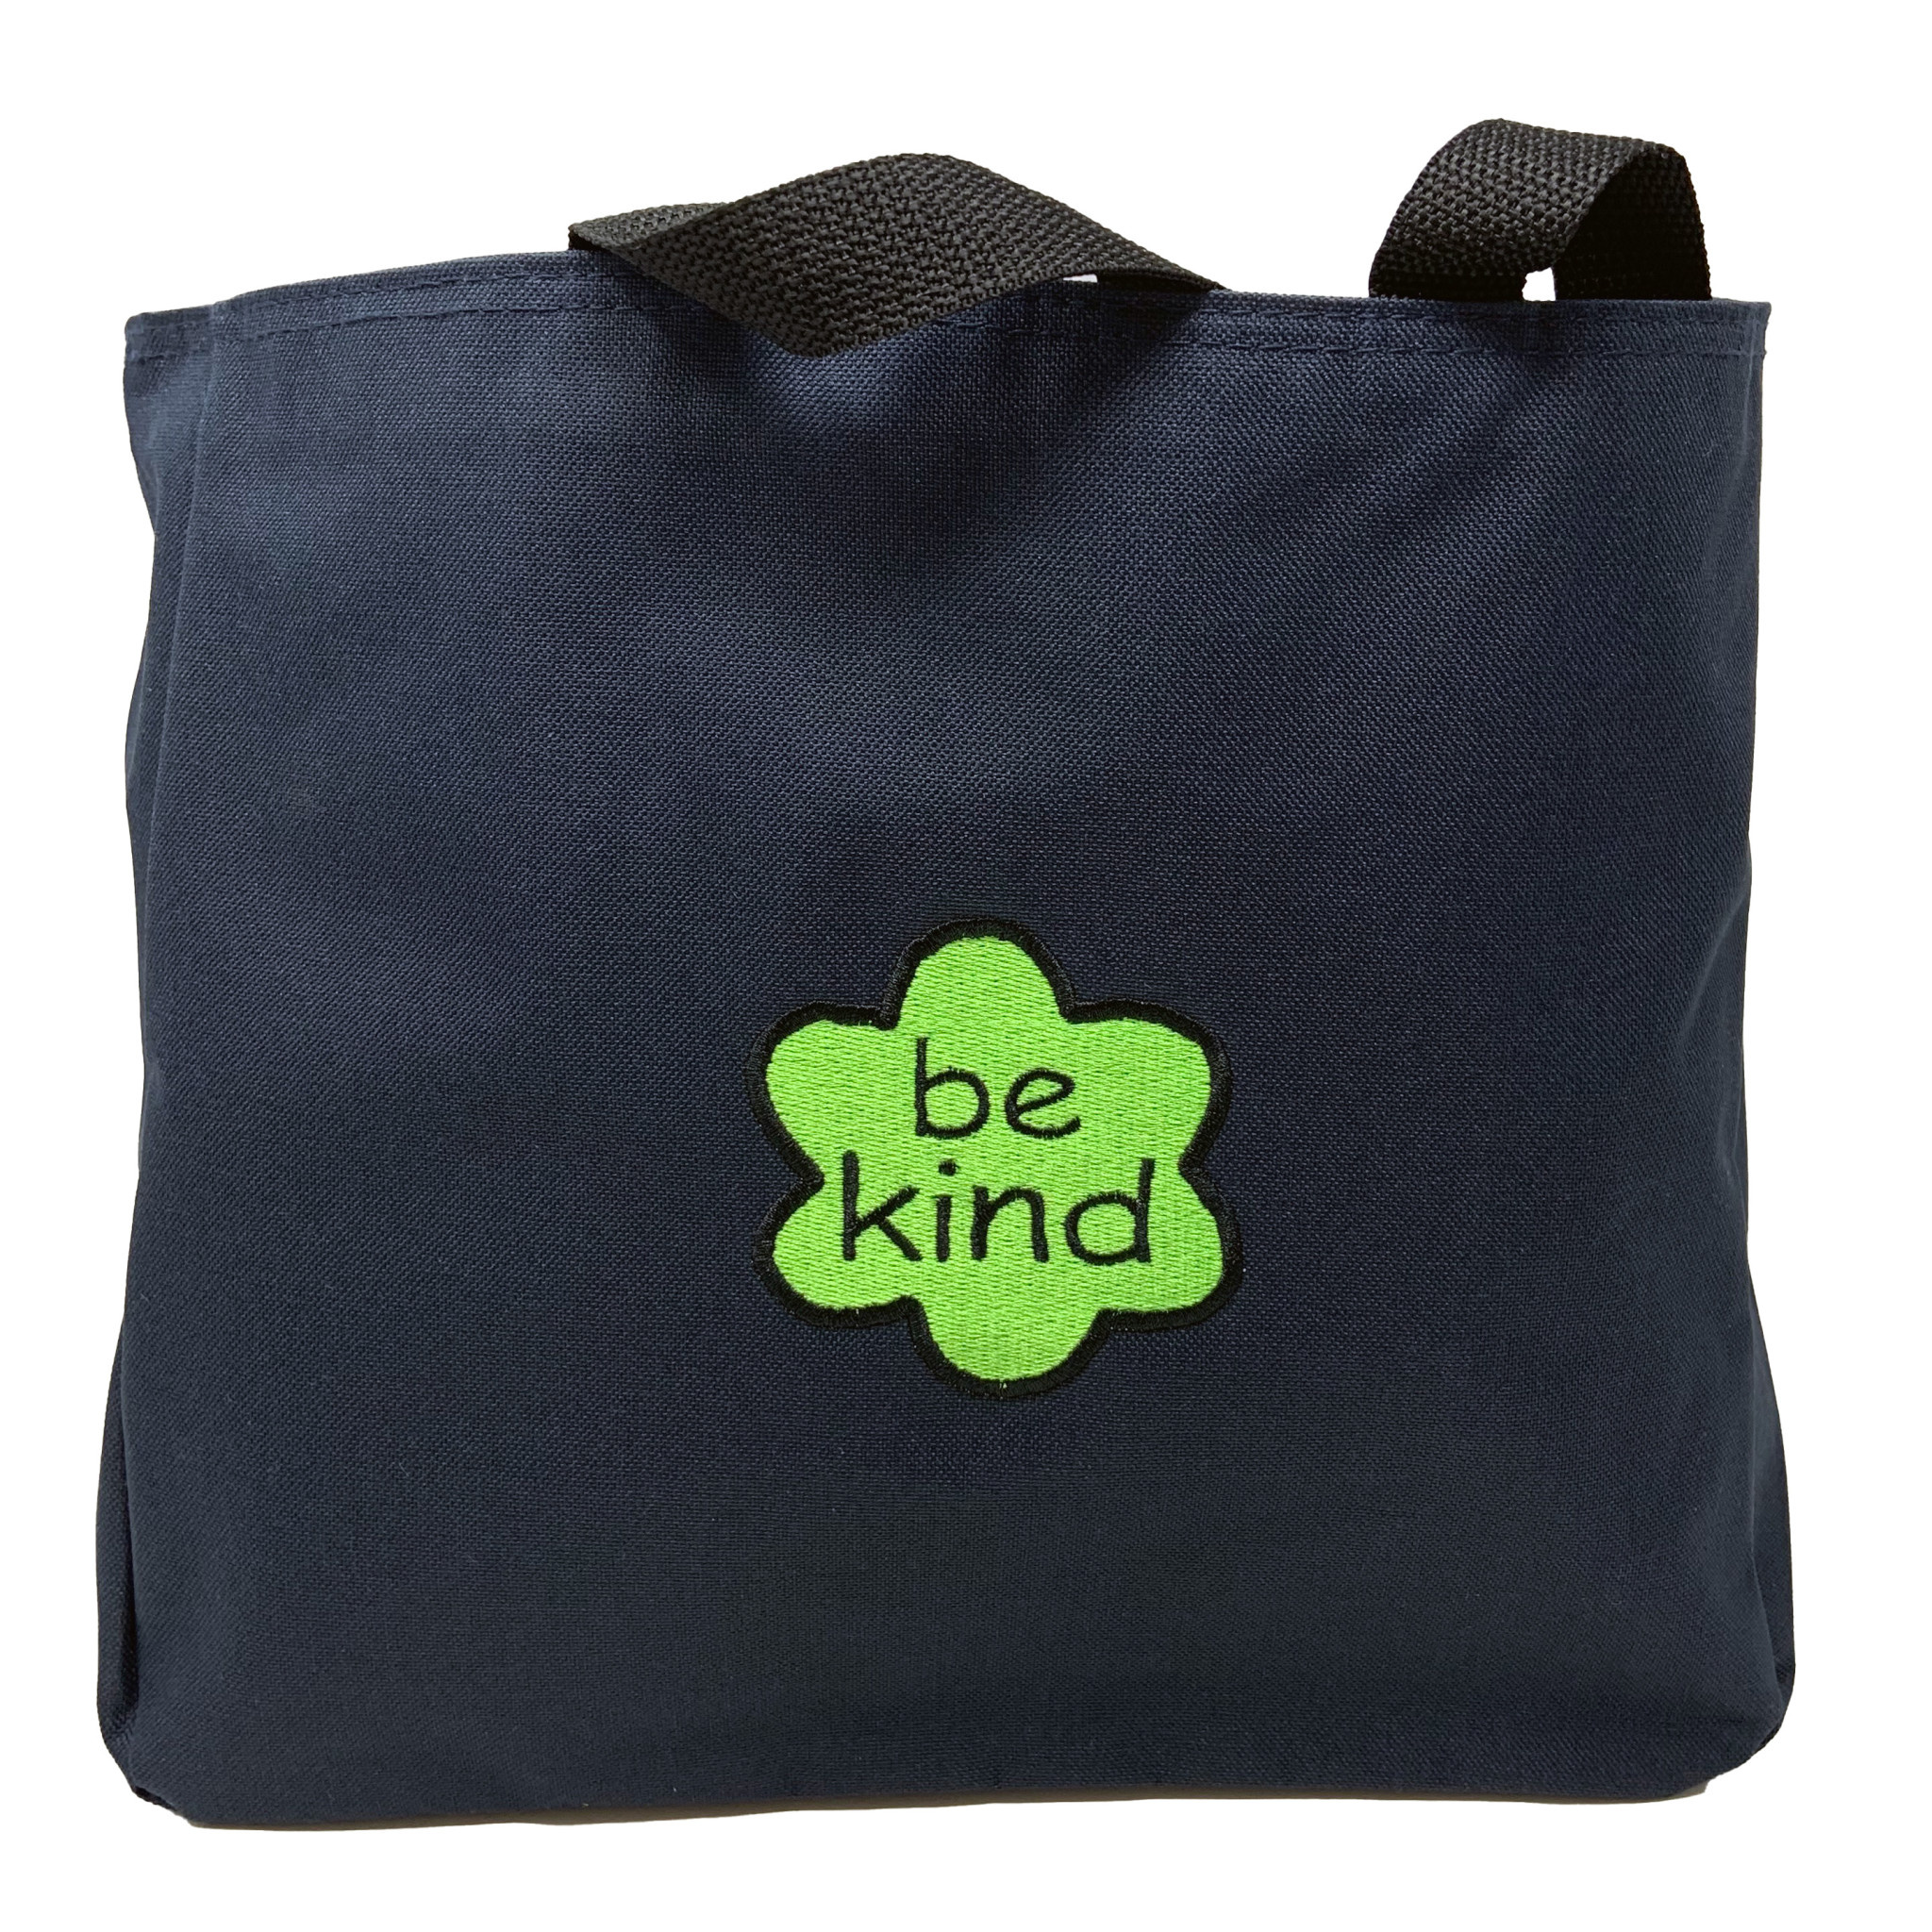 Kind Stitches Embroidered Tote